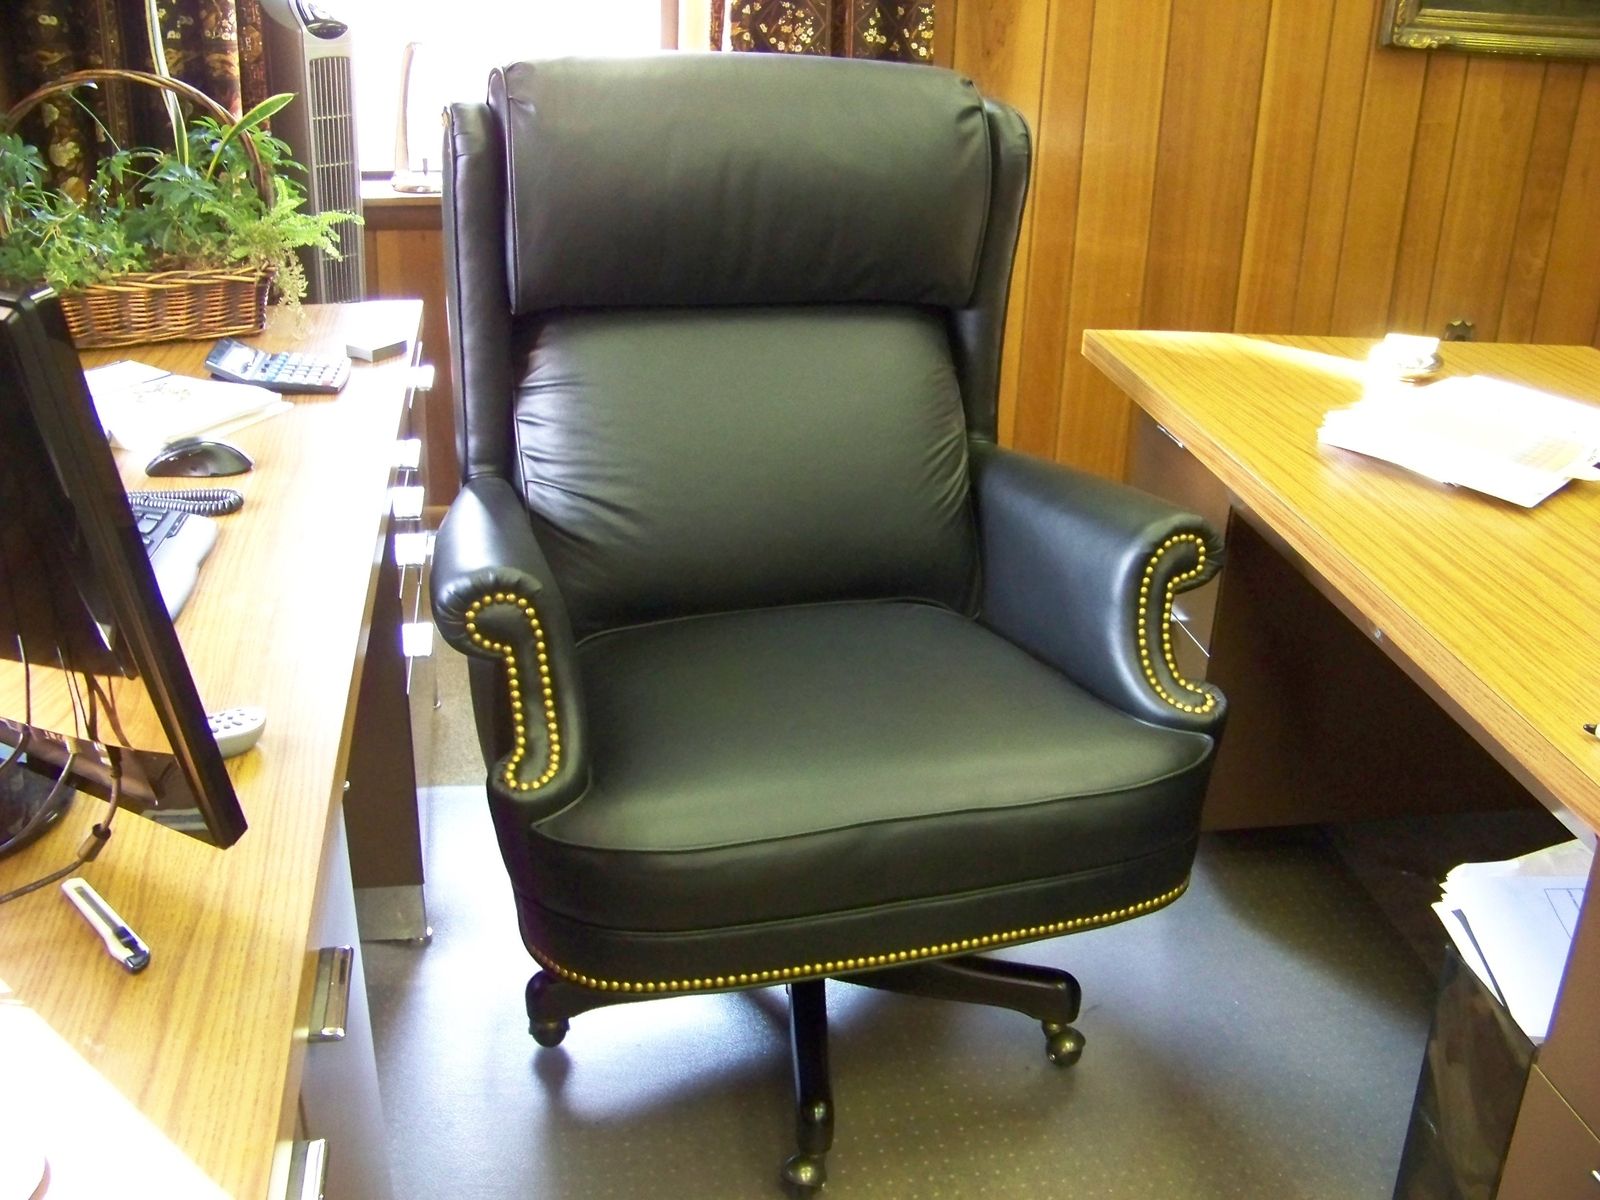 Hand Crafted Custom Built -- Leather Desk Chair For An Execitive Office